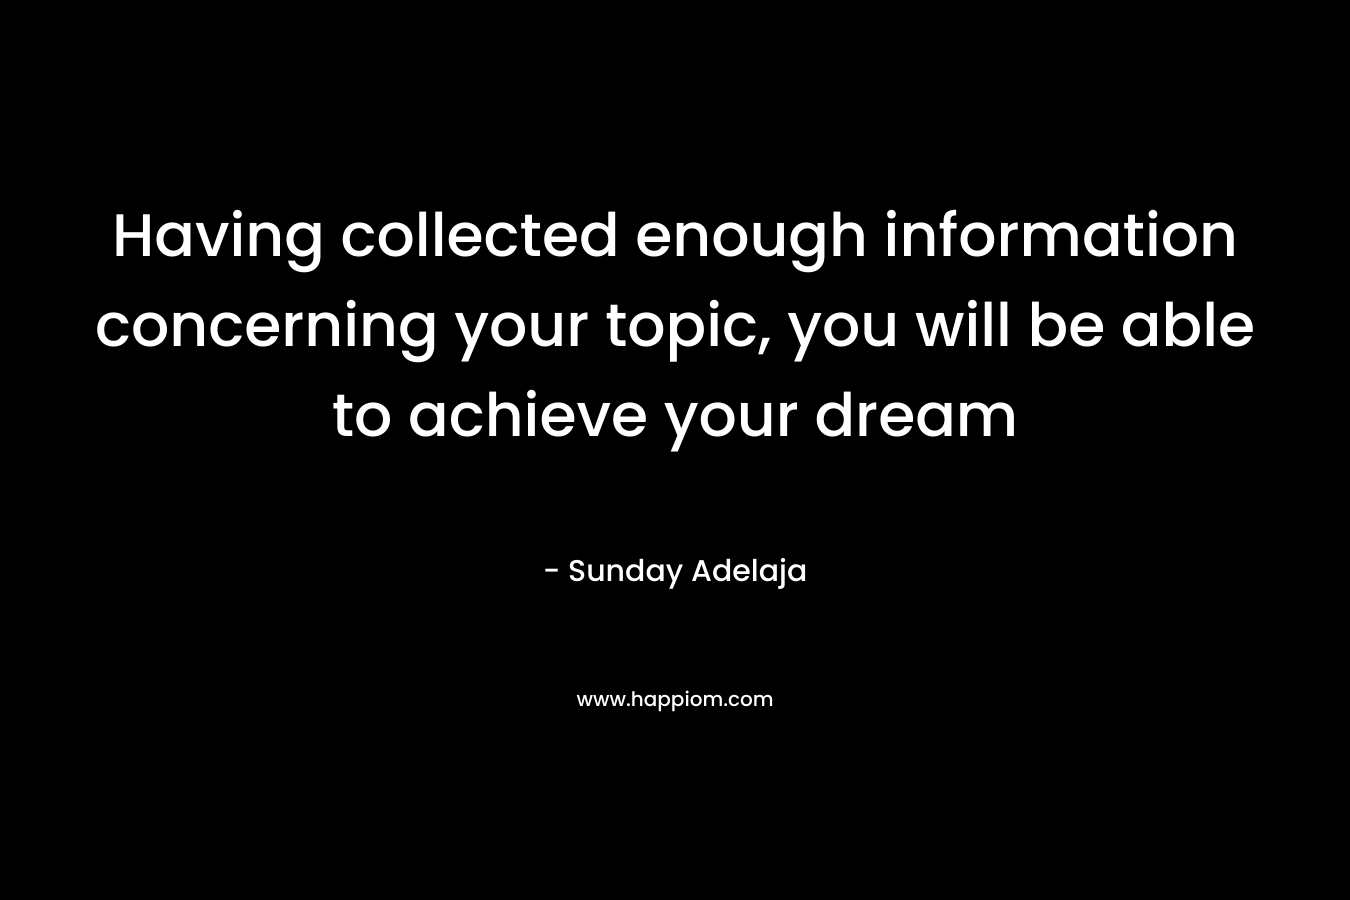 Having collected enough information concerning your topic, you will be able to achieve your dream – Sunday Adelaja